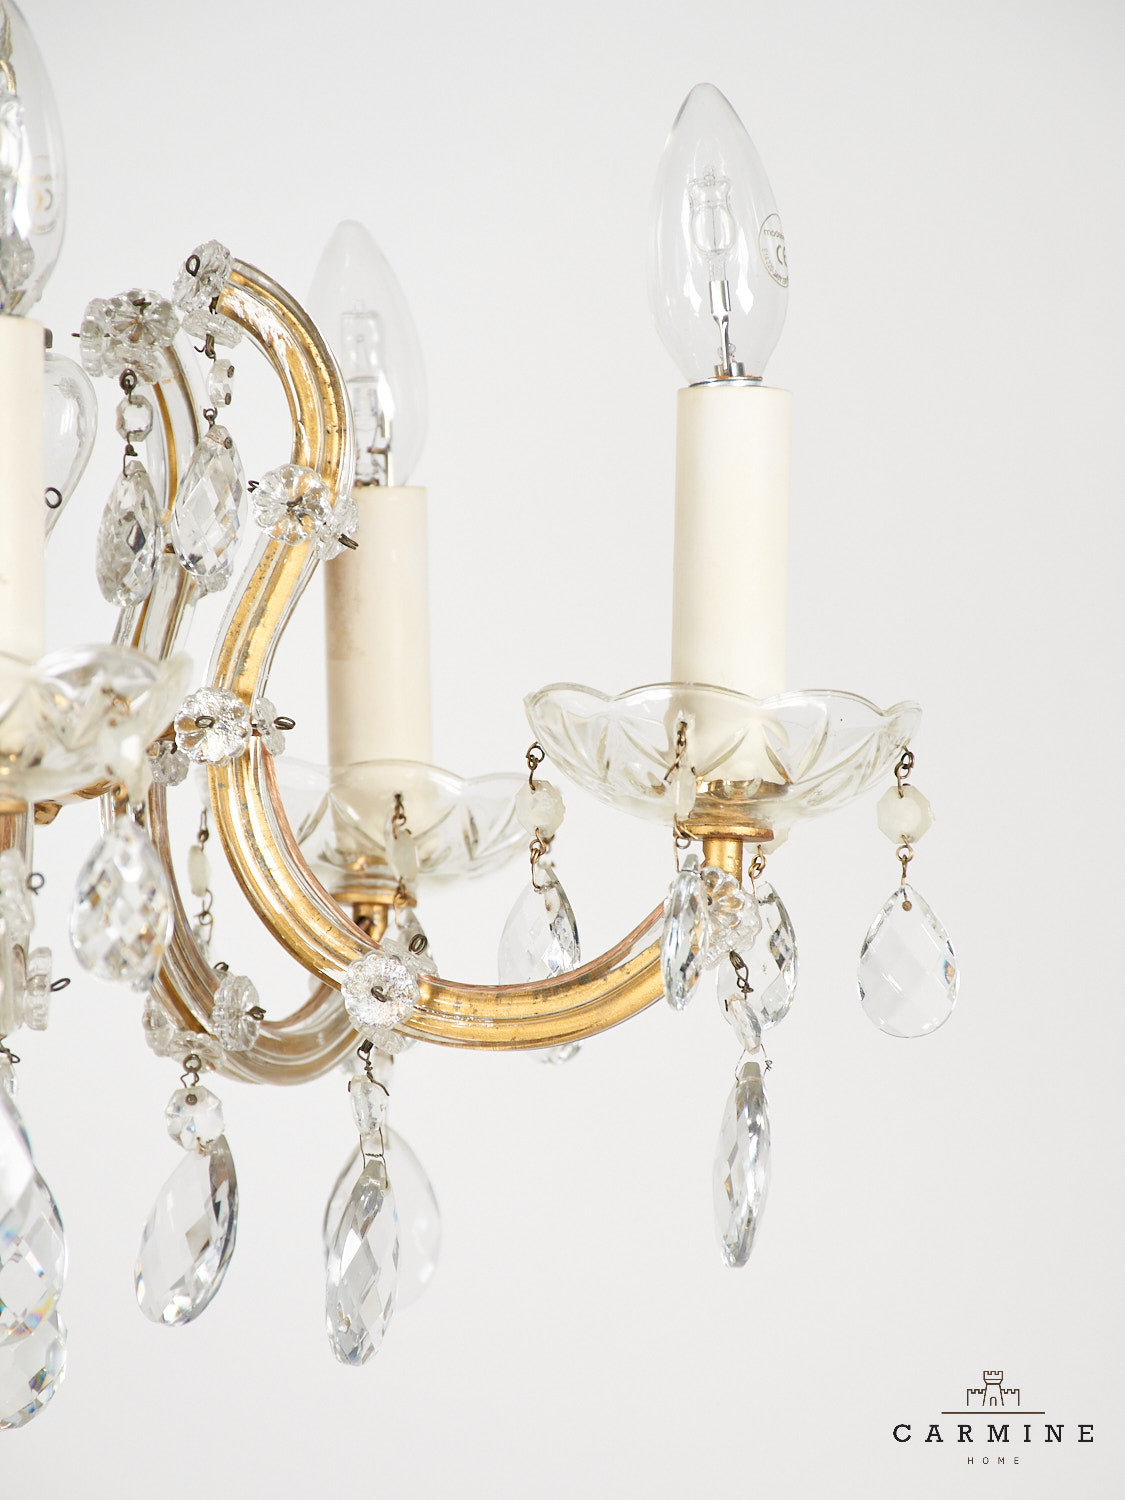 5-flame chandelier "Maria Theresia", 20th century.